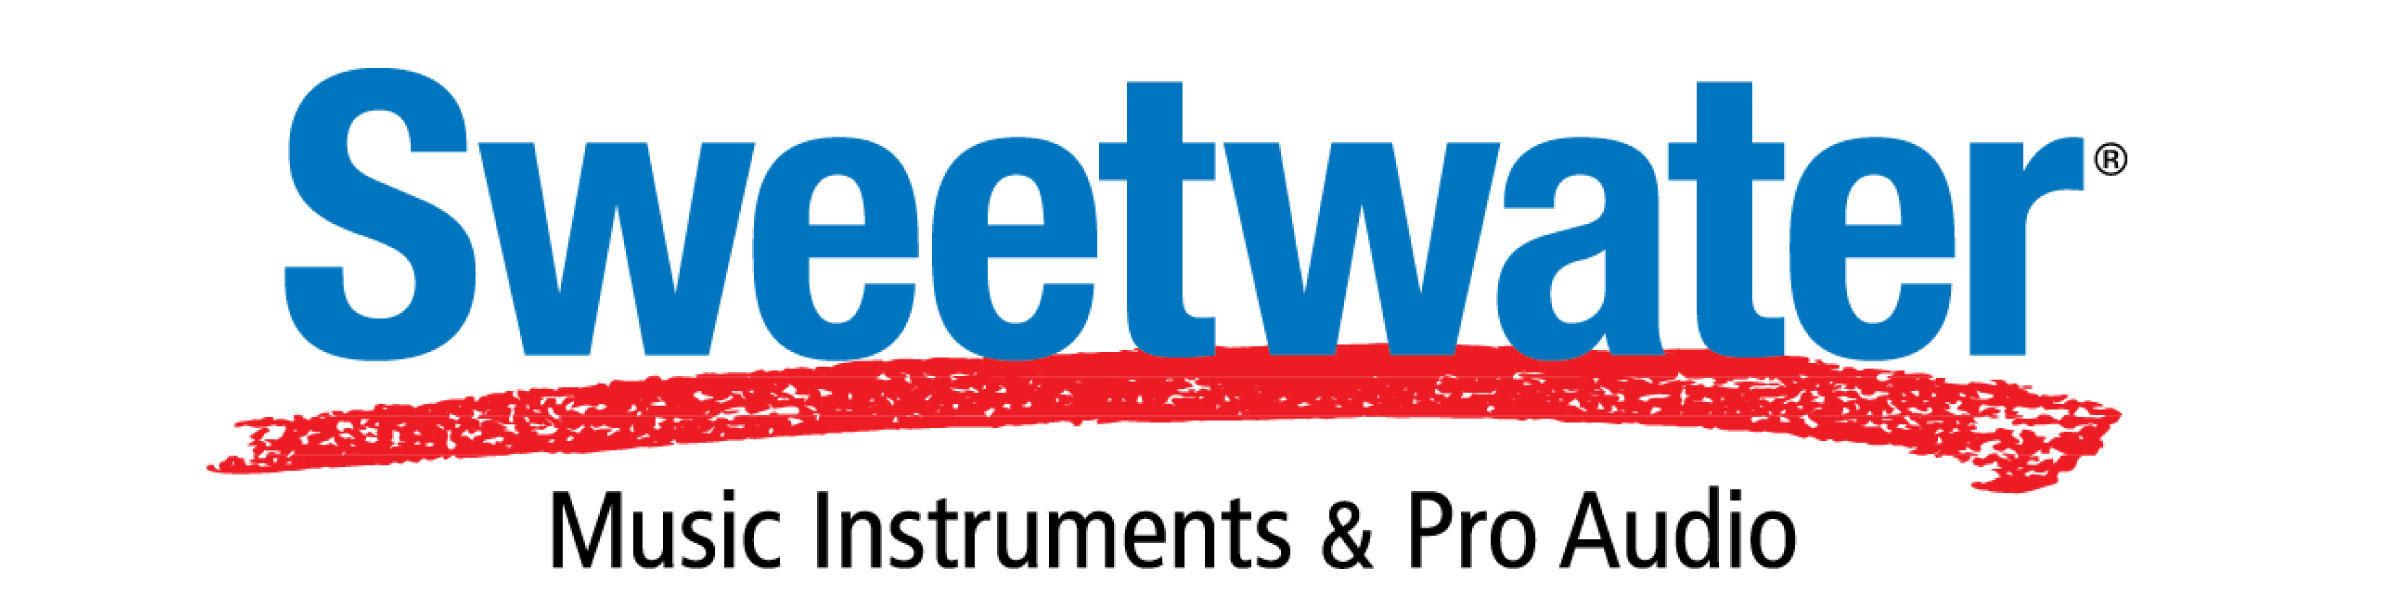 Sweetwater Makes Major Investment Northeast Indiana Public Radio